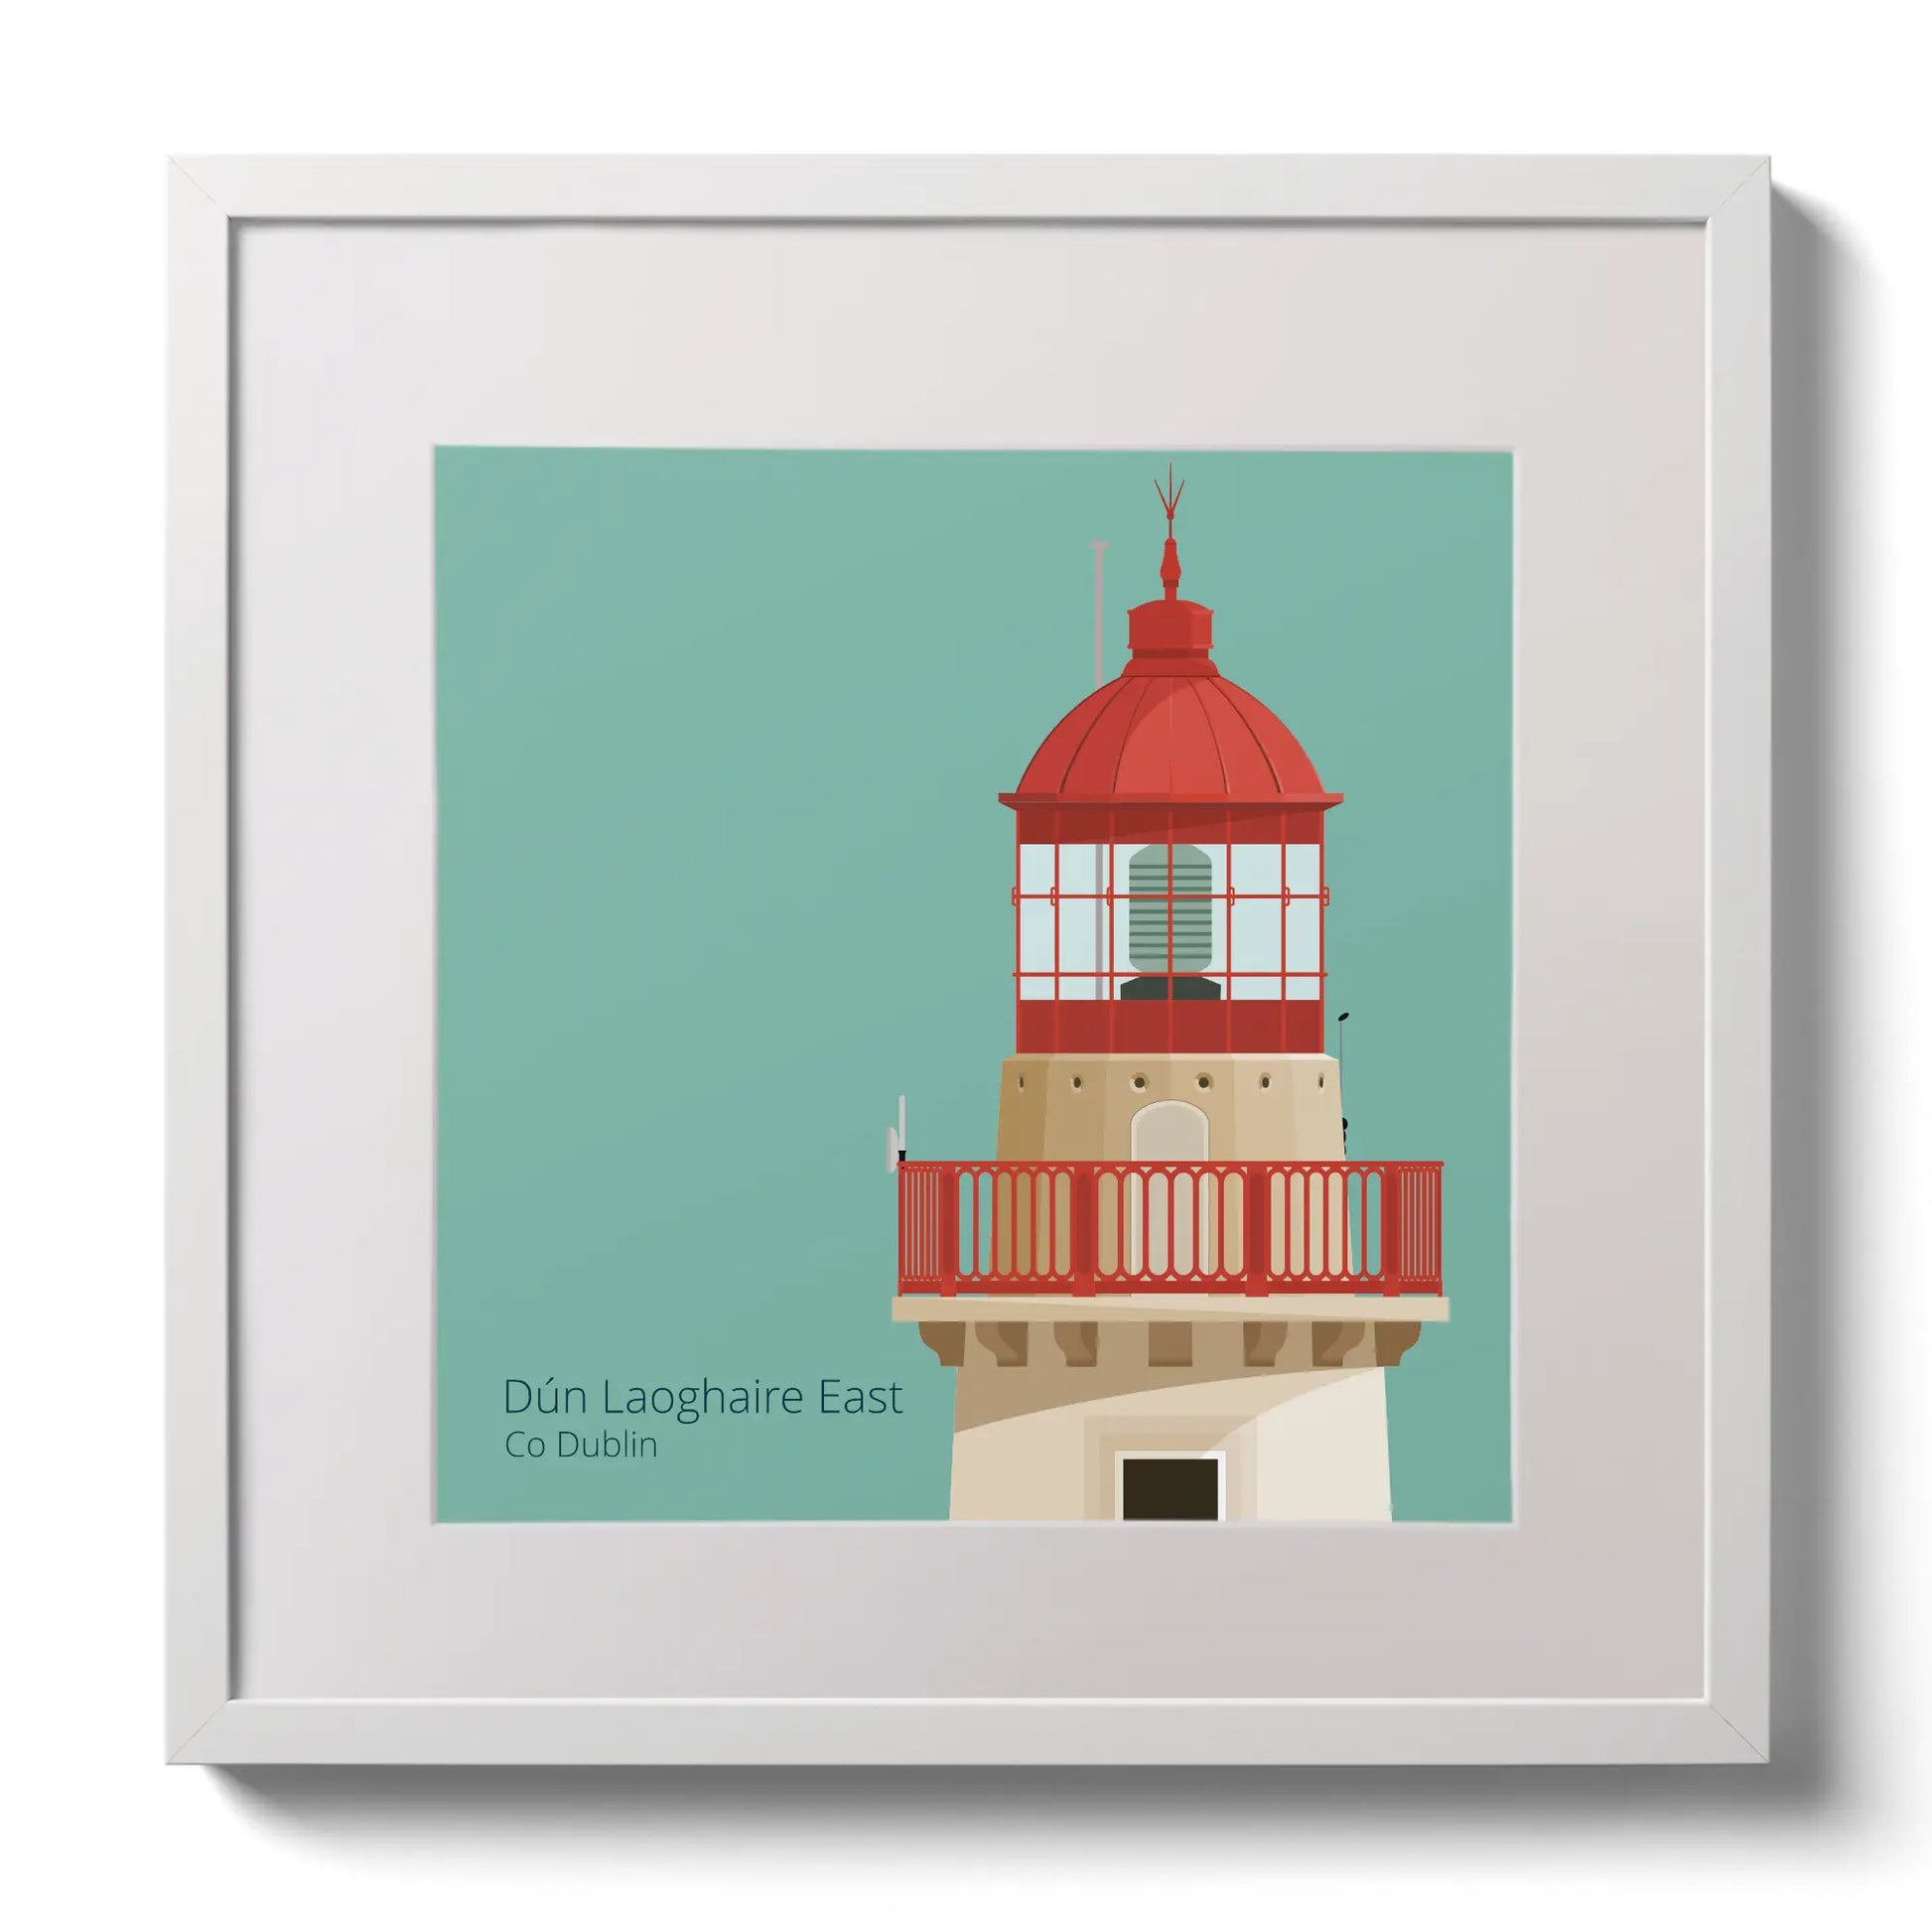 Illustration of Dún Laoghaire East lighthouse on an ocean green background,  in a white square frame measuring 30x30cm.